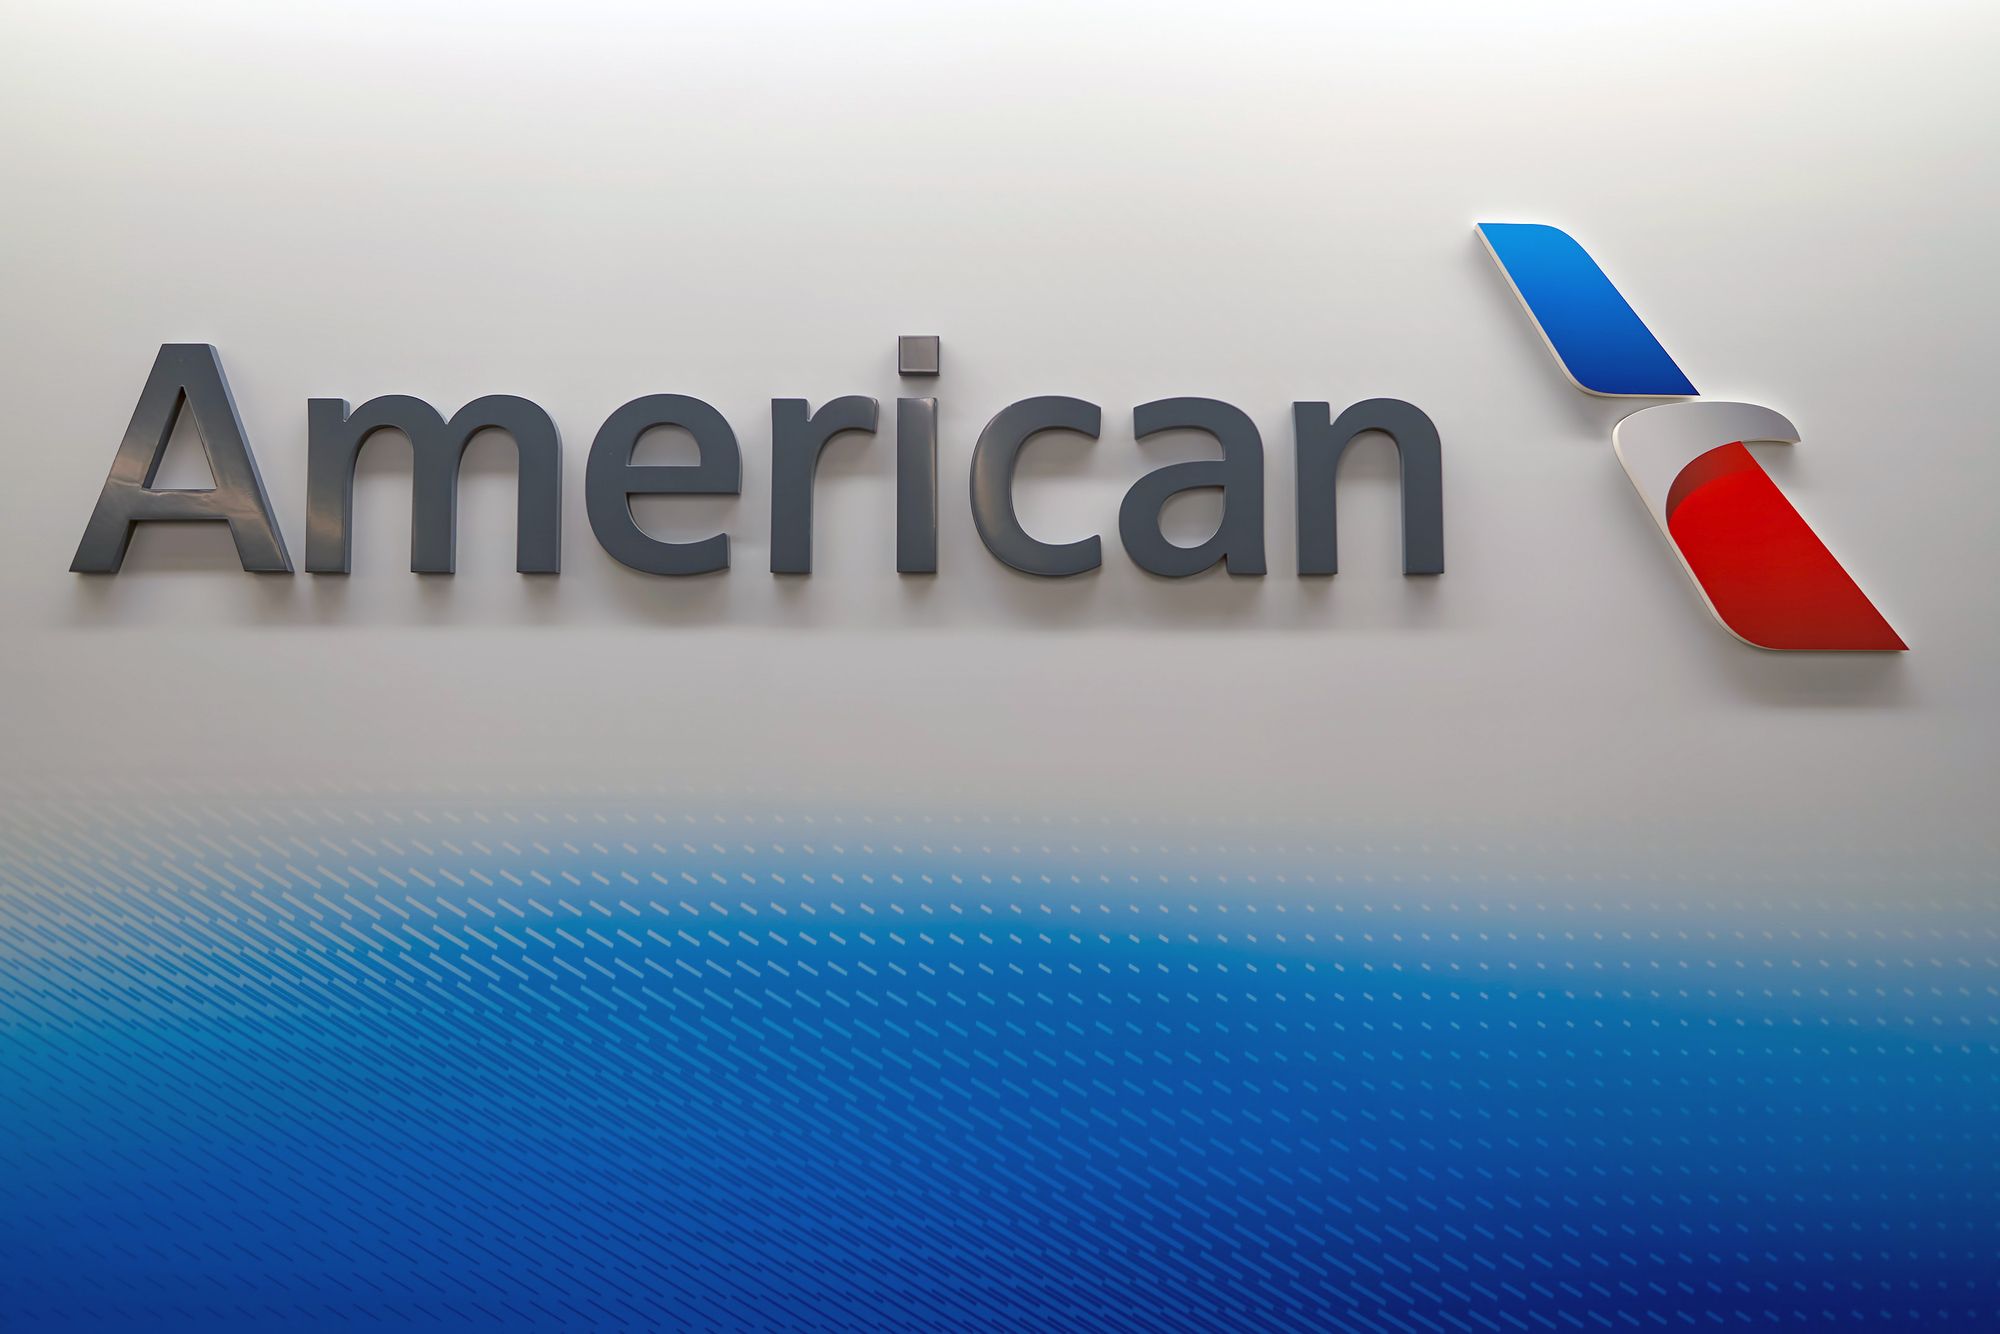 CHICAGO - MARCH 22, 2016: American Airlines logo on the wall at Chicago O'Hare International Airport. American Airlines, Inc. is a major American airline headquartered in Fort Worth, Texas.